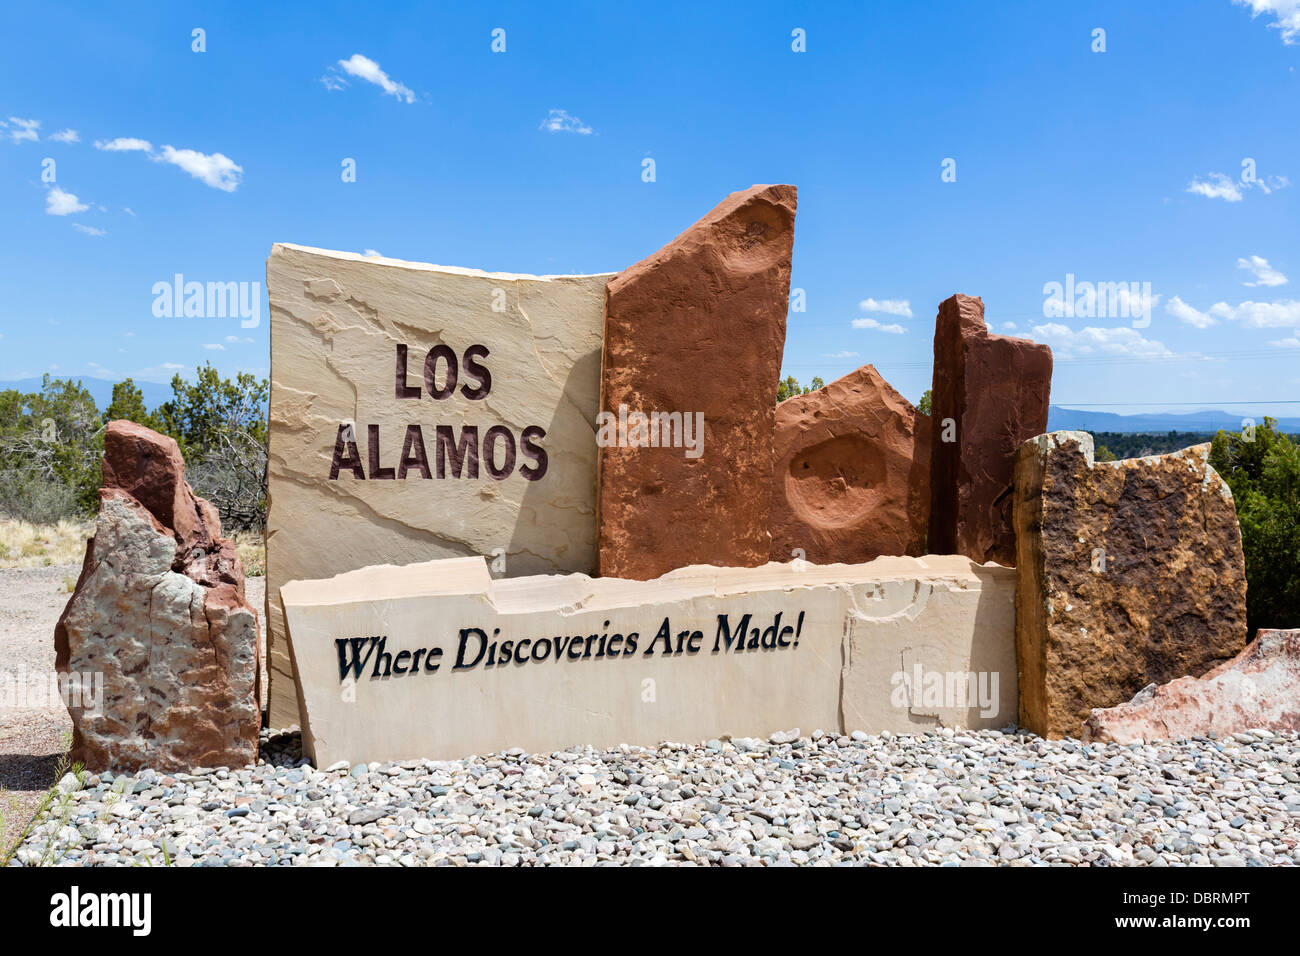 Entrance sign in the town of Los Alamos, New Mexico, USA Stock Photo